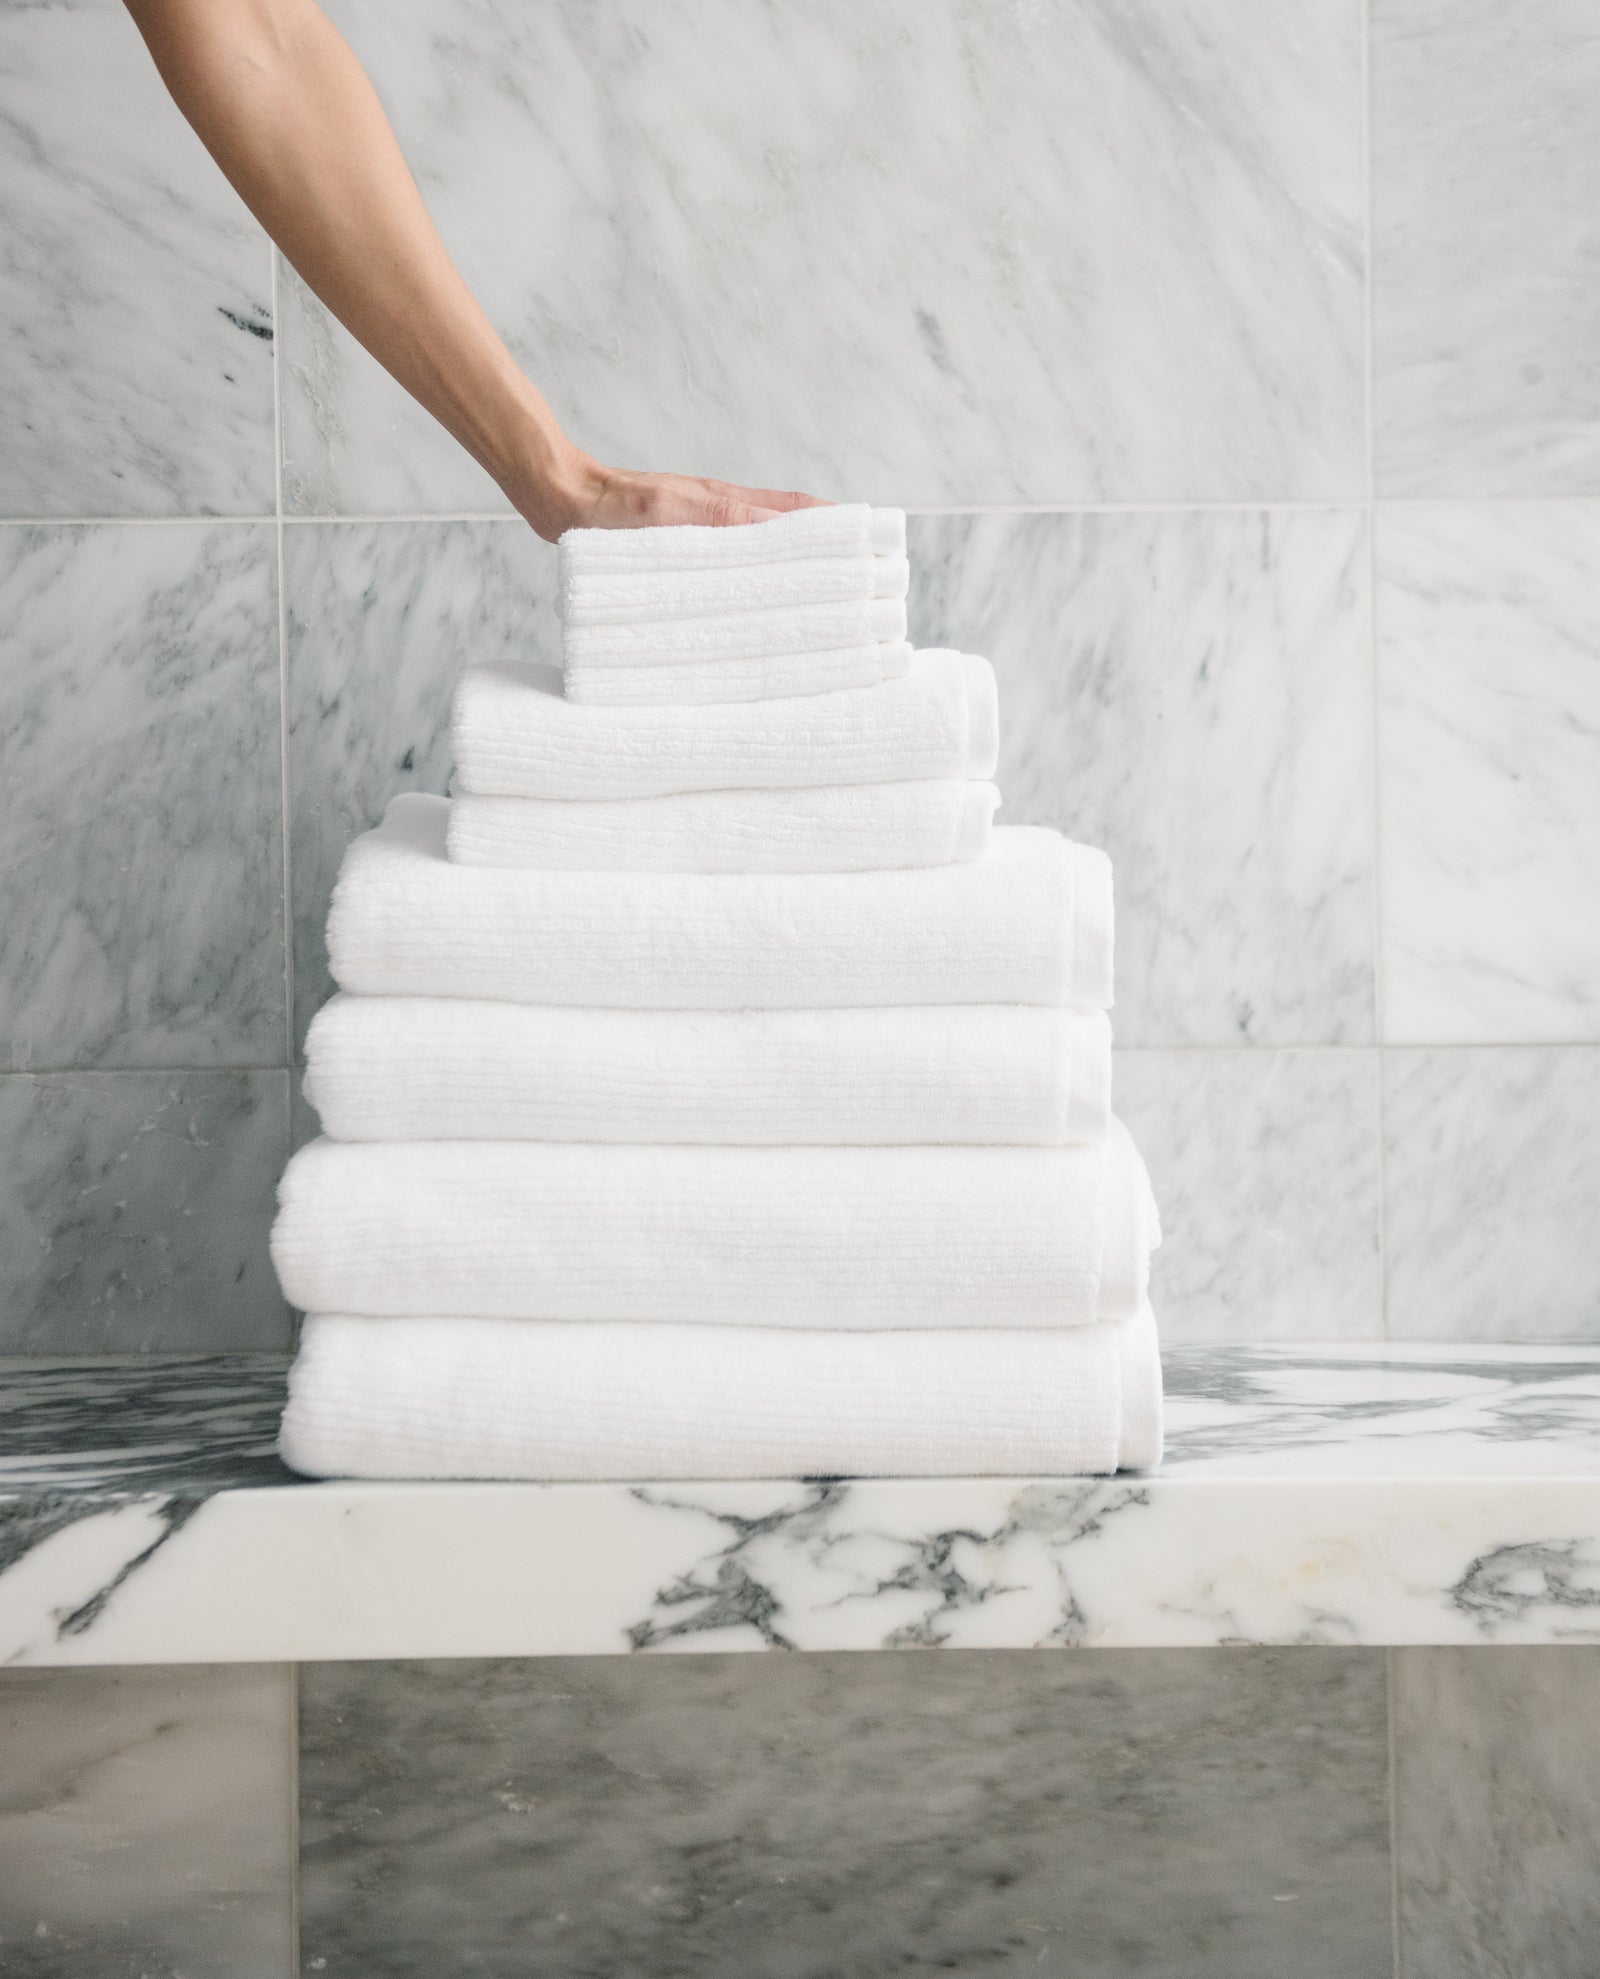 Complete Ribbed Terry Bath Bundle in the color White. Photo of Complete Ribbed Terry Bath Bundle taken in a marble bathroom. The Complete Ribbed Terry Bath Bundle are resting on a marble counter top. A hand is resting on top of the Bath items 